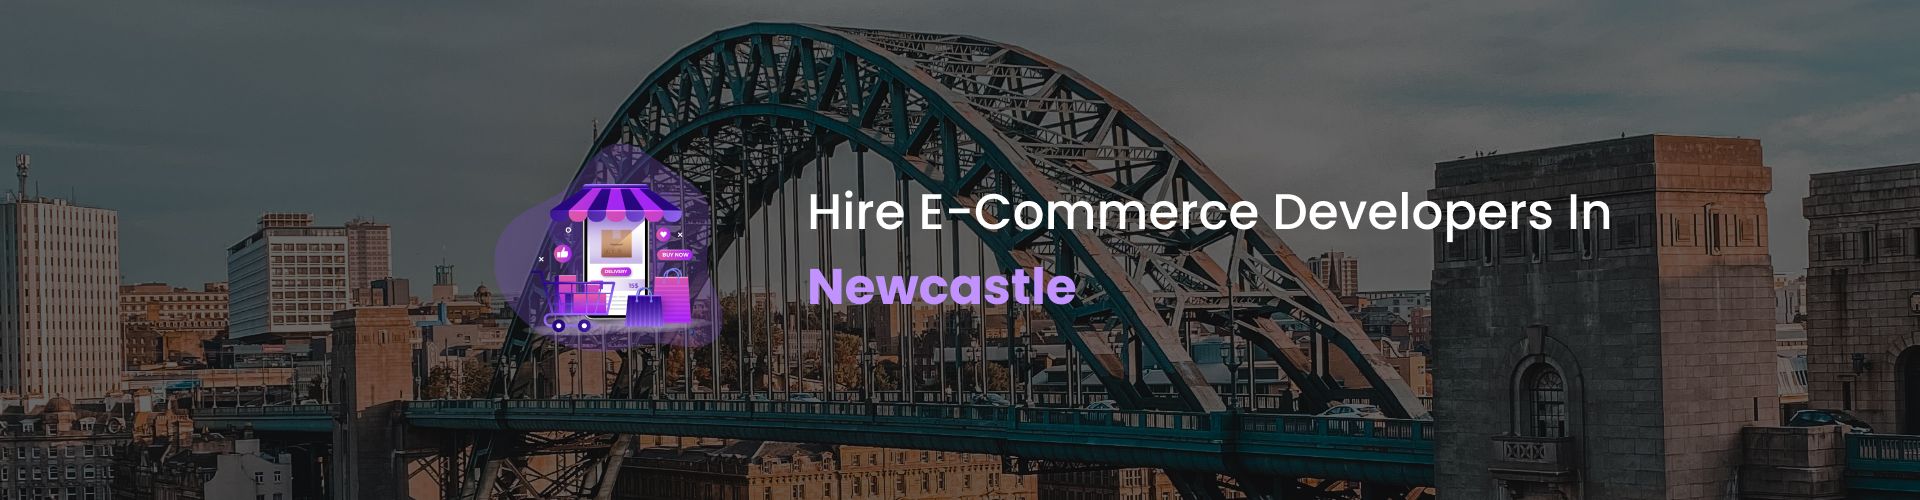 hire ecommerce developers in newcastle